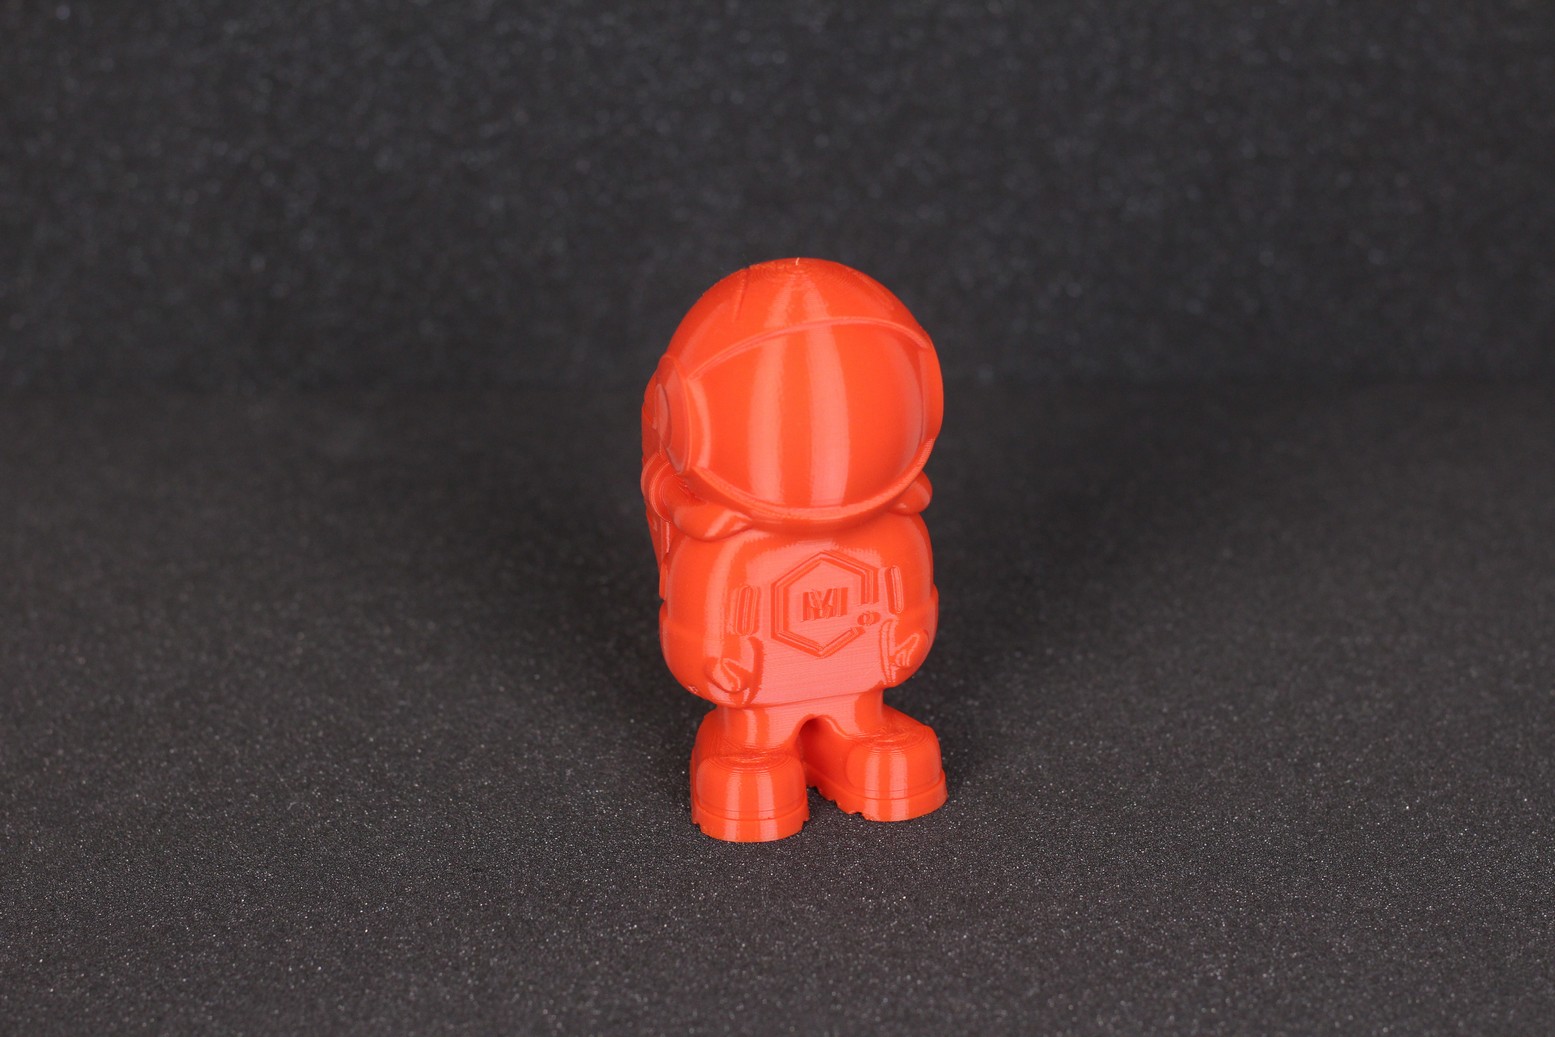 Phil A Ment printed in PLA on Creality CR 200B 2 | Creality CR-200B Review: Budget Enclosed 3D Printer